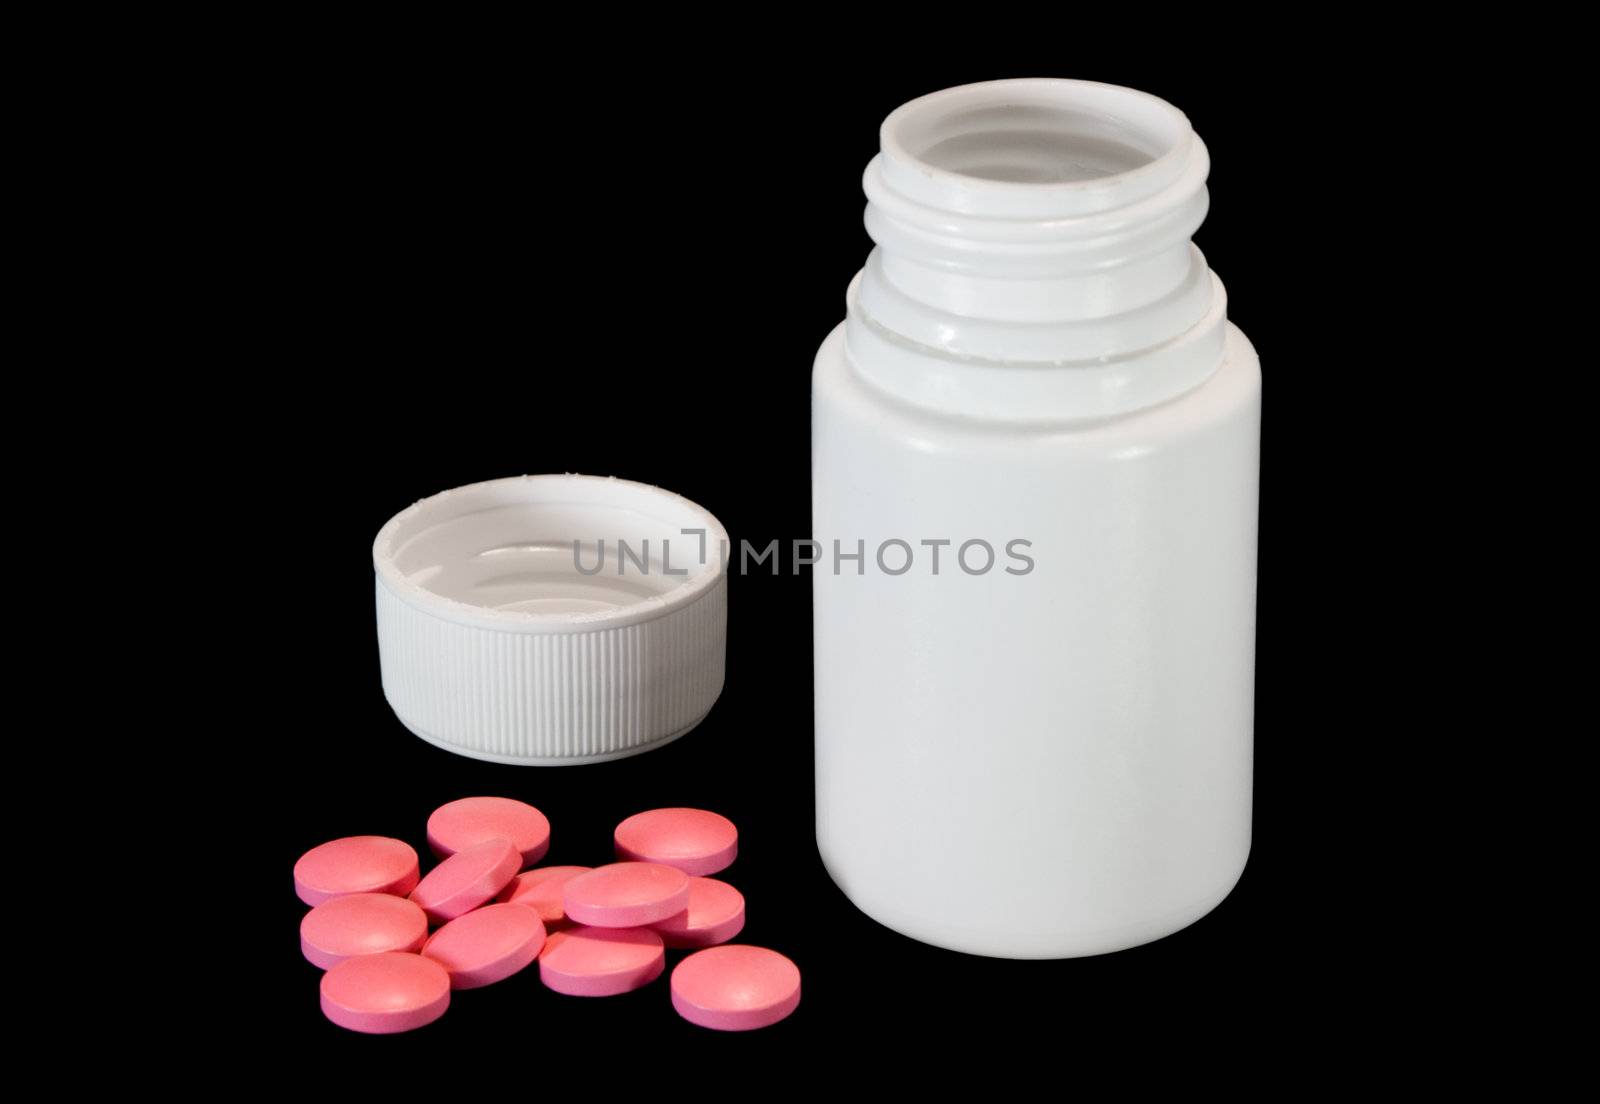 Small while plastic bottle with its cap off and pile of pink pills